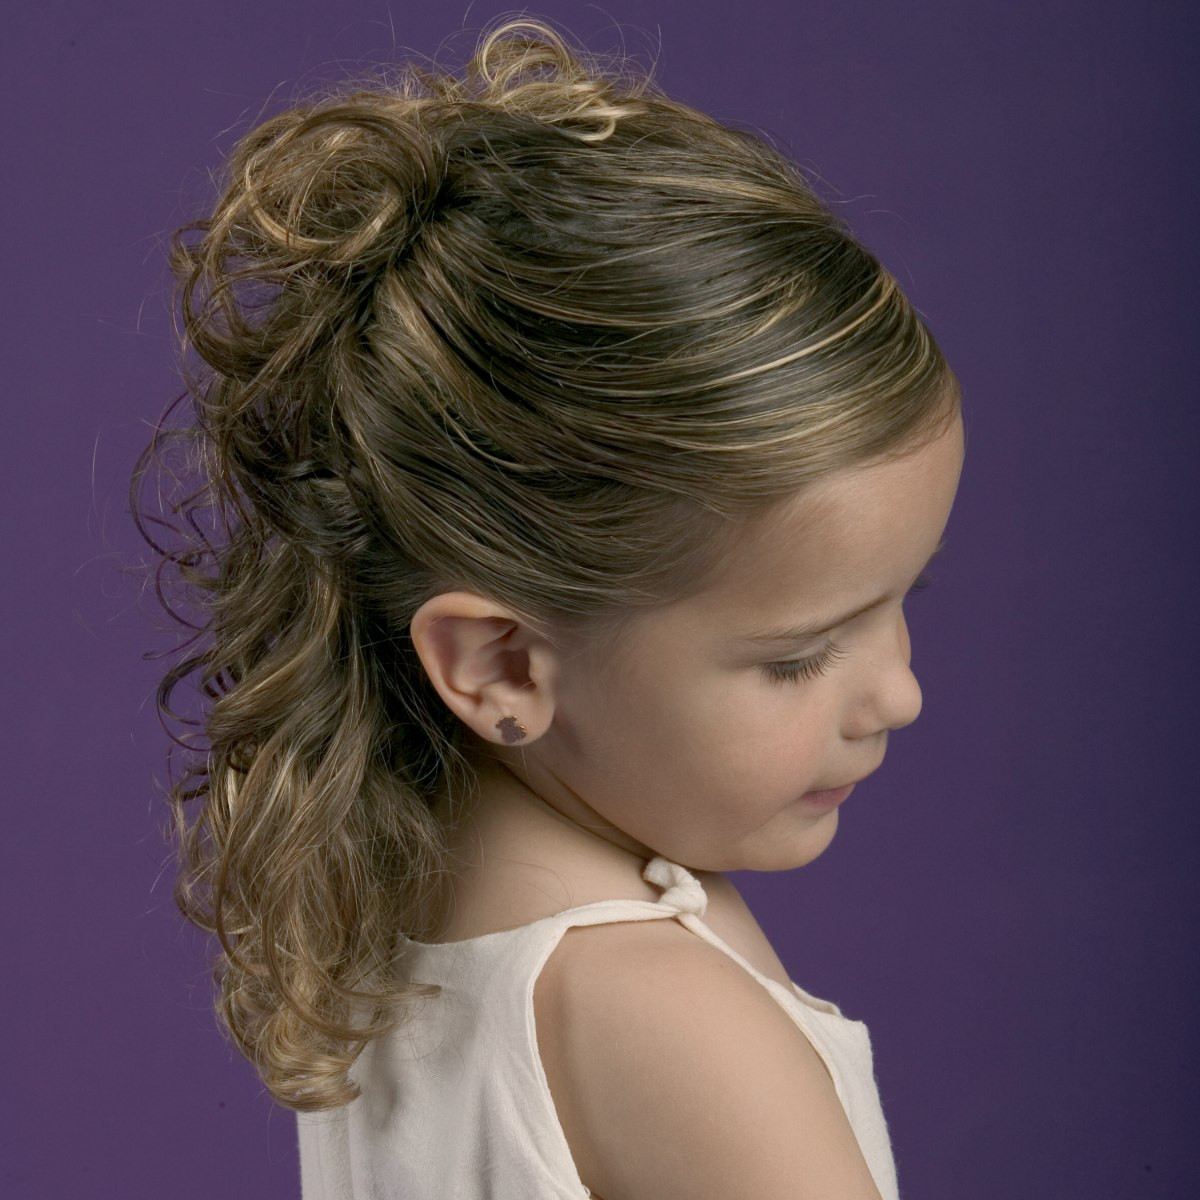 Little Girl Updo Hairstyles
 Simple partial up style for little girls with natural curl